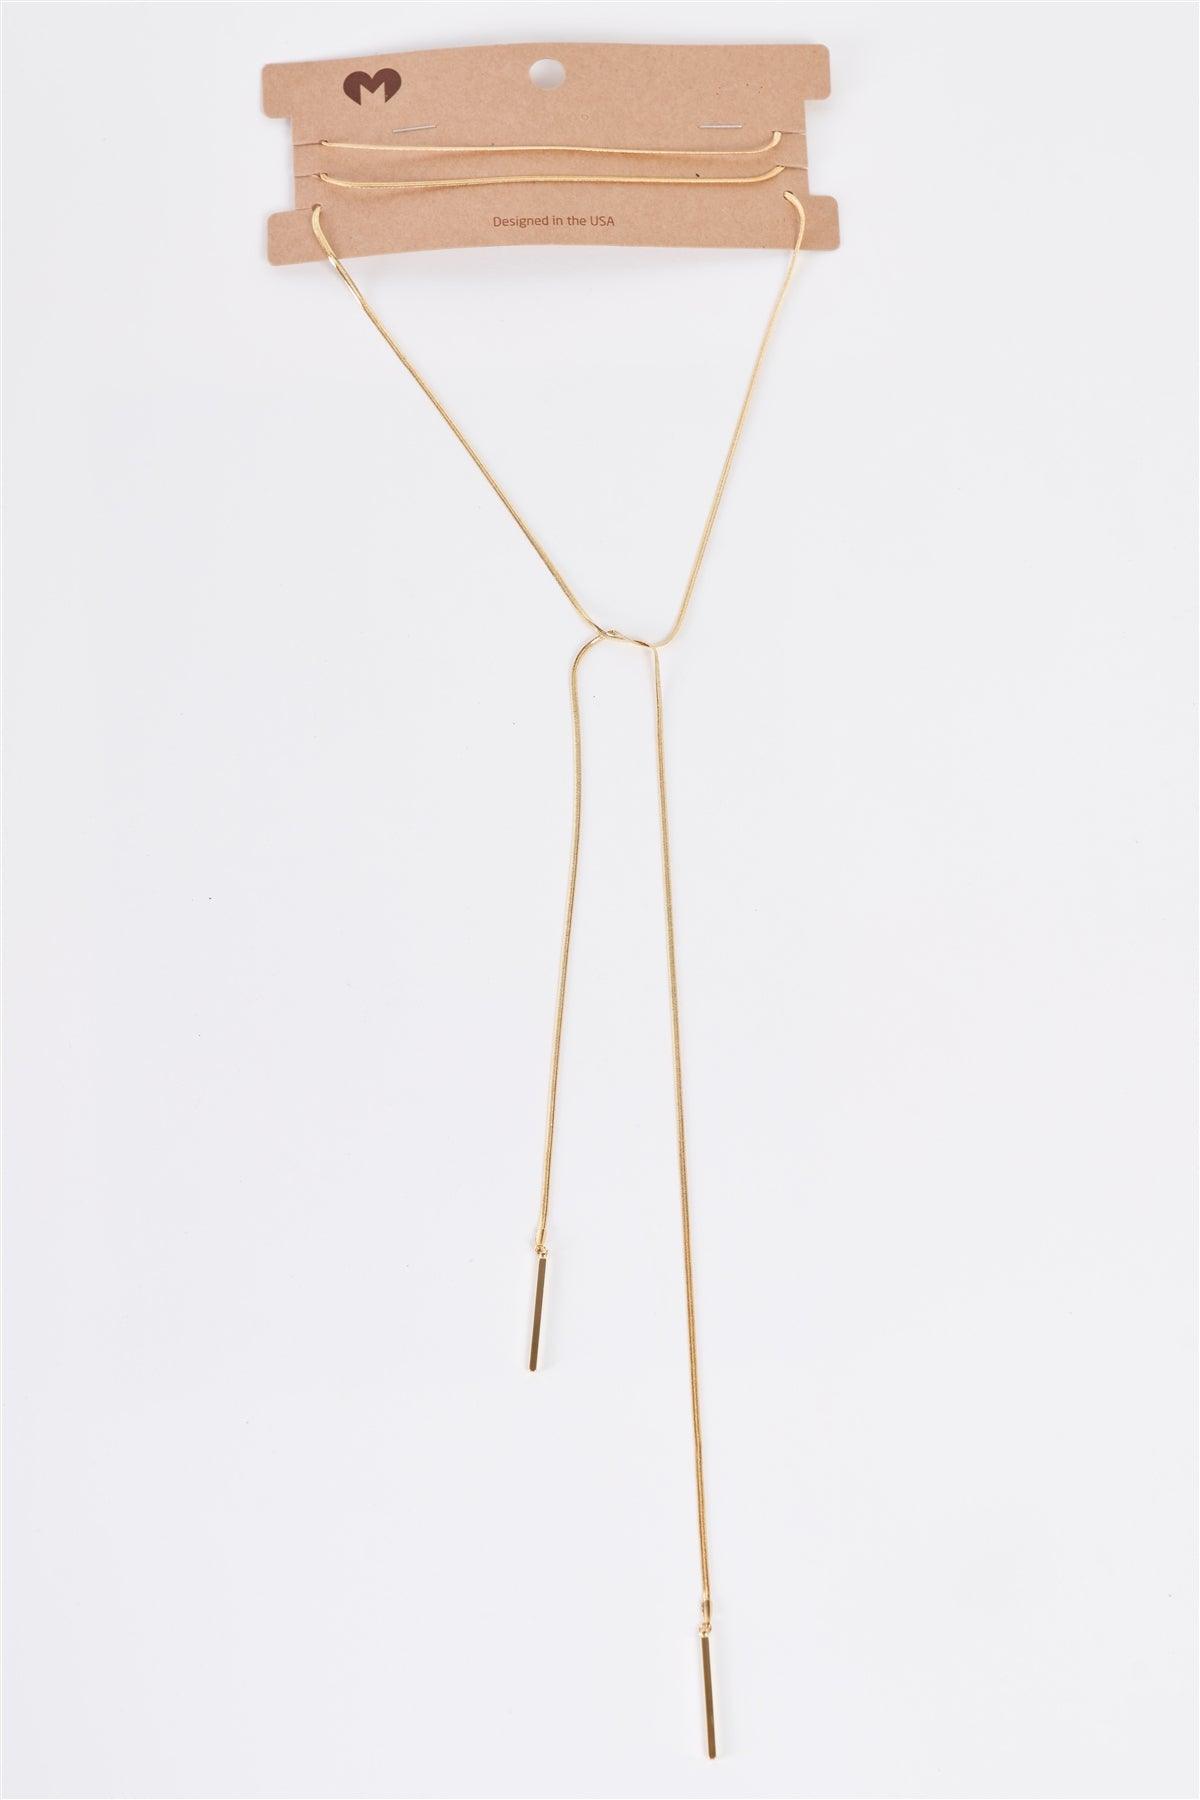 Gold Long Aglet Tip Chain Open Wrap Necklace /5 Pieces